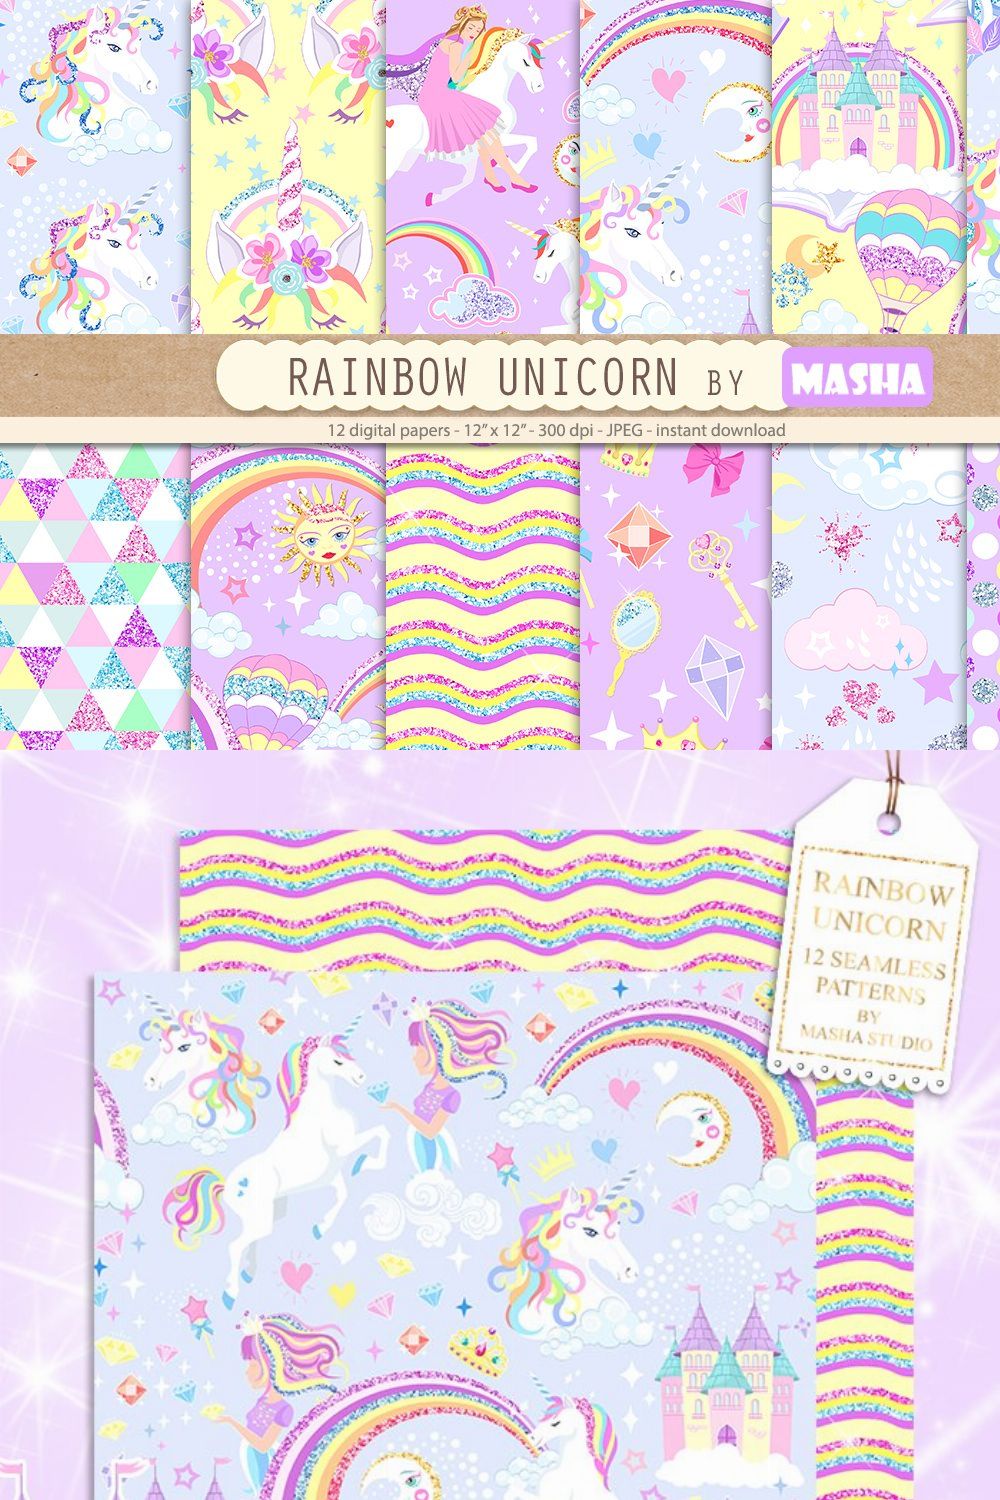 RAINBOW UNICORN digital papers pinterest preview image.